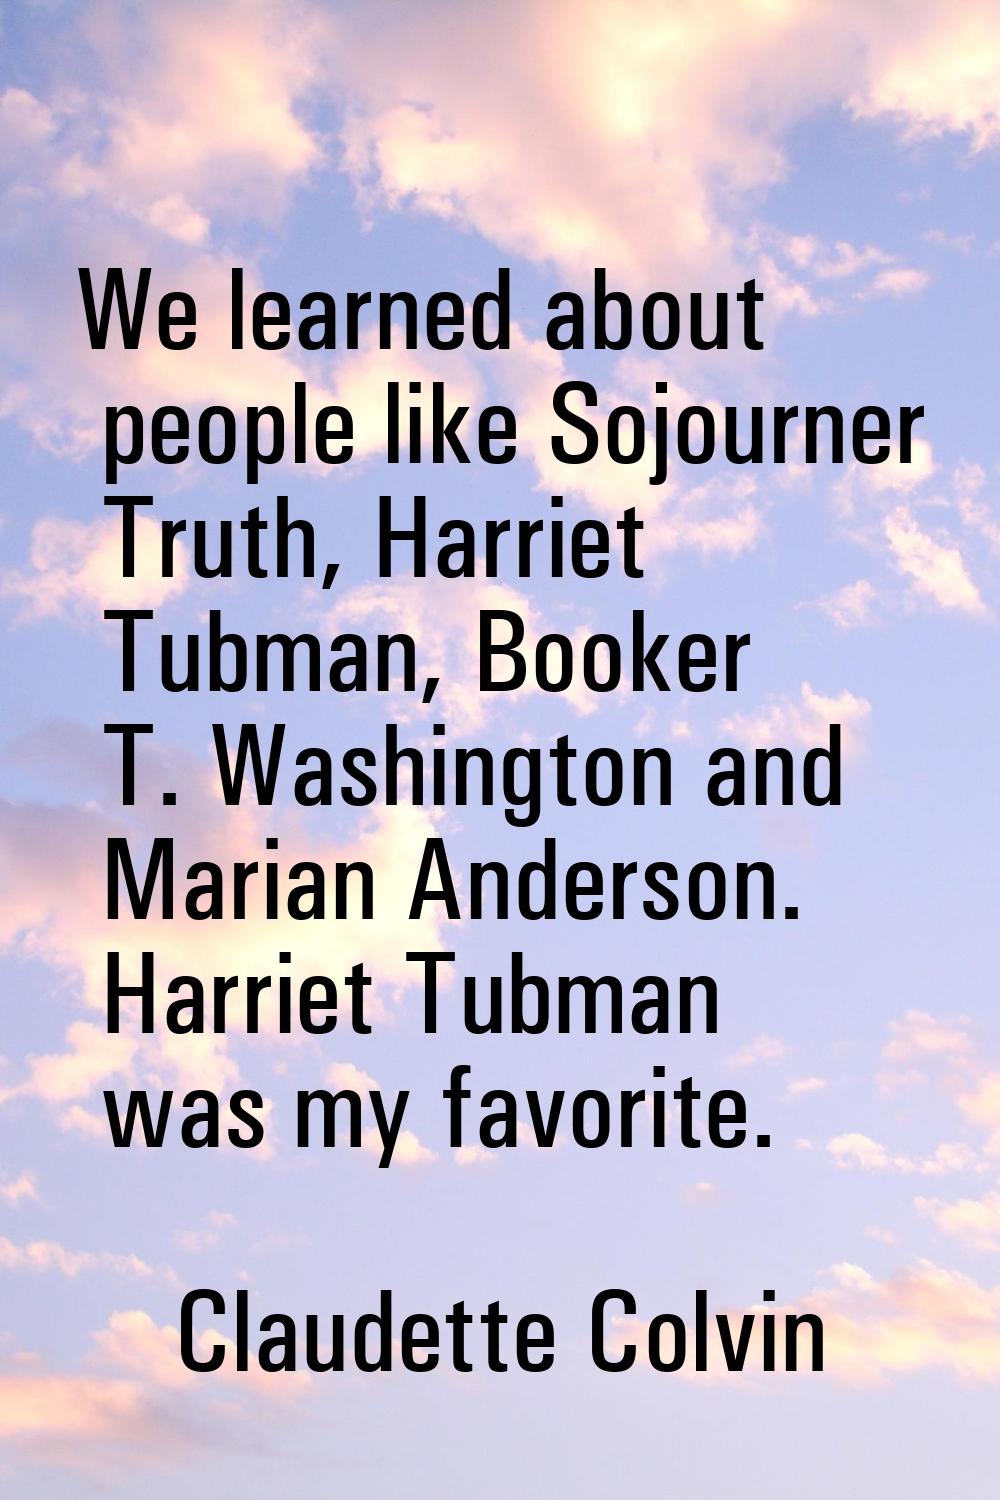 We learned about people like Sojourner Truth, Harriet Tubman, Booker T. Washington and Marian Ander